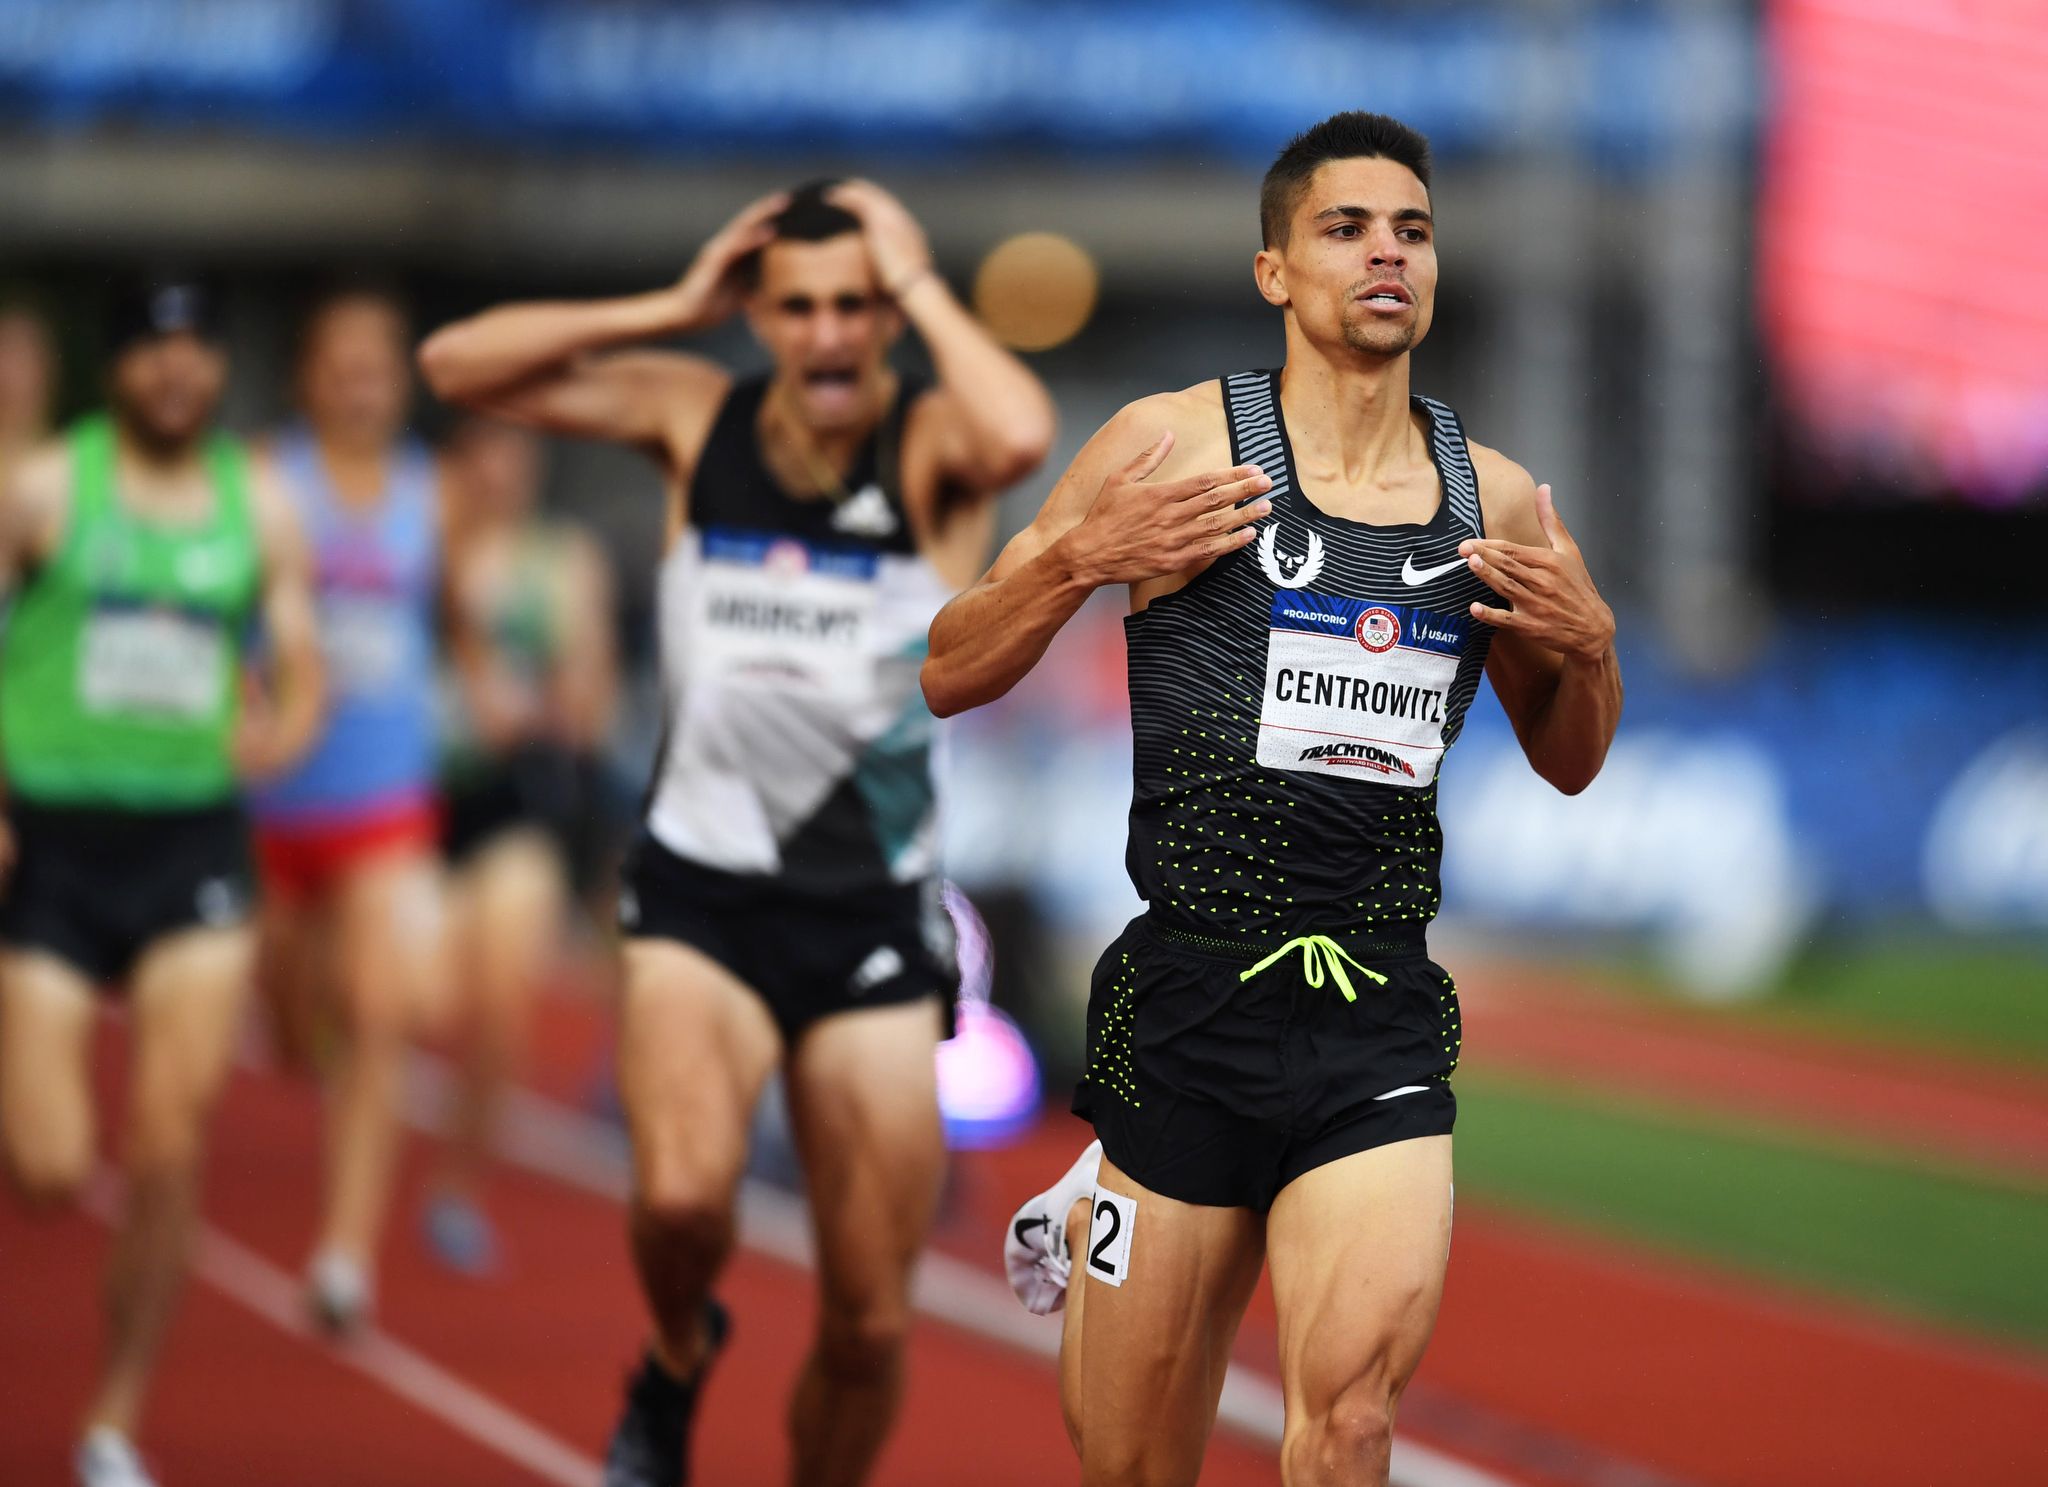 Matthew Centrowitz - U.S. Olympic track and field trials - Best photos